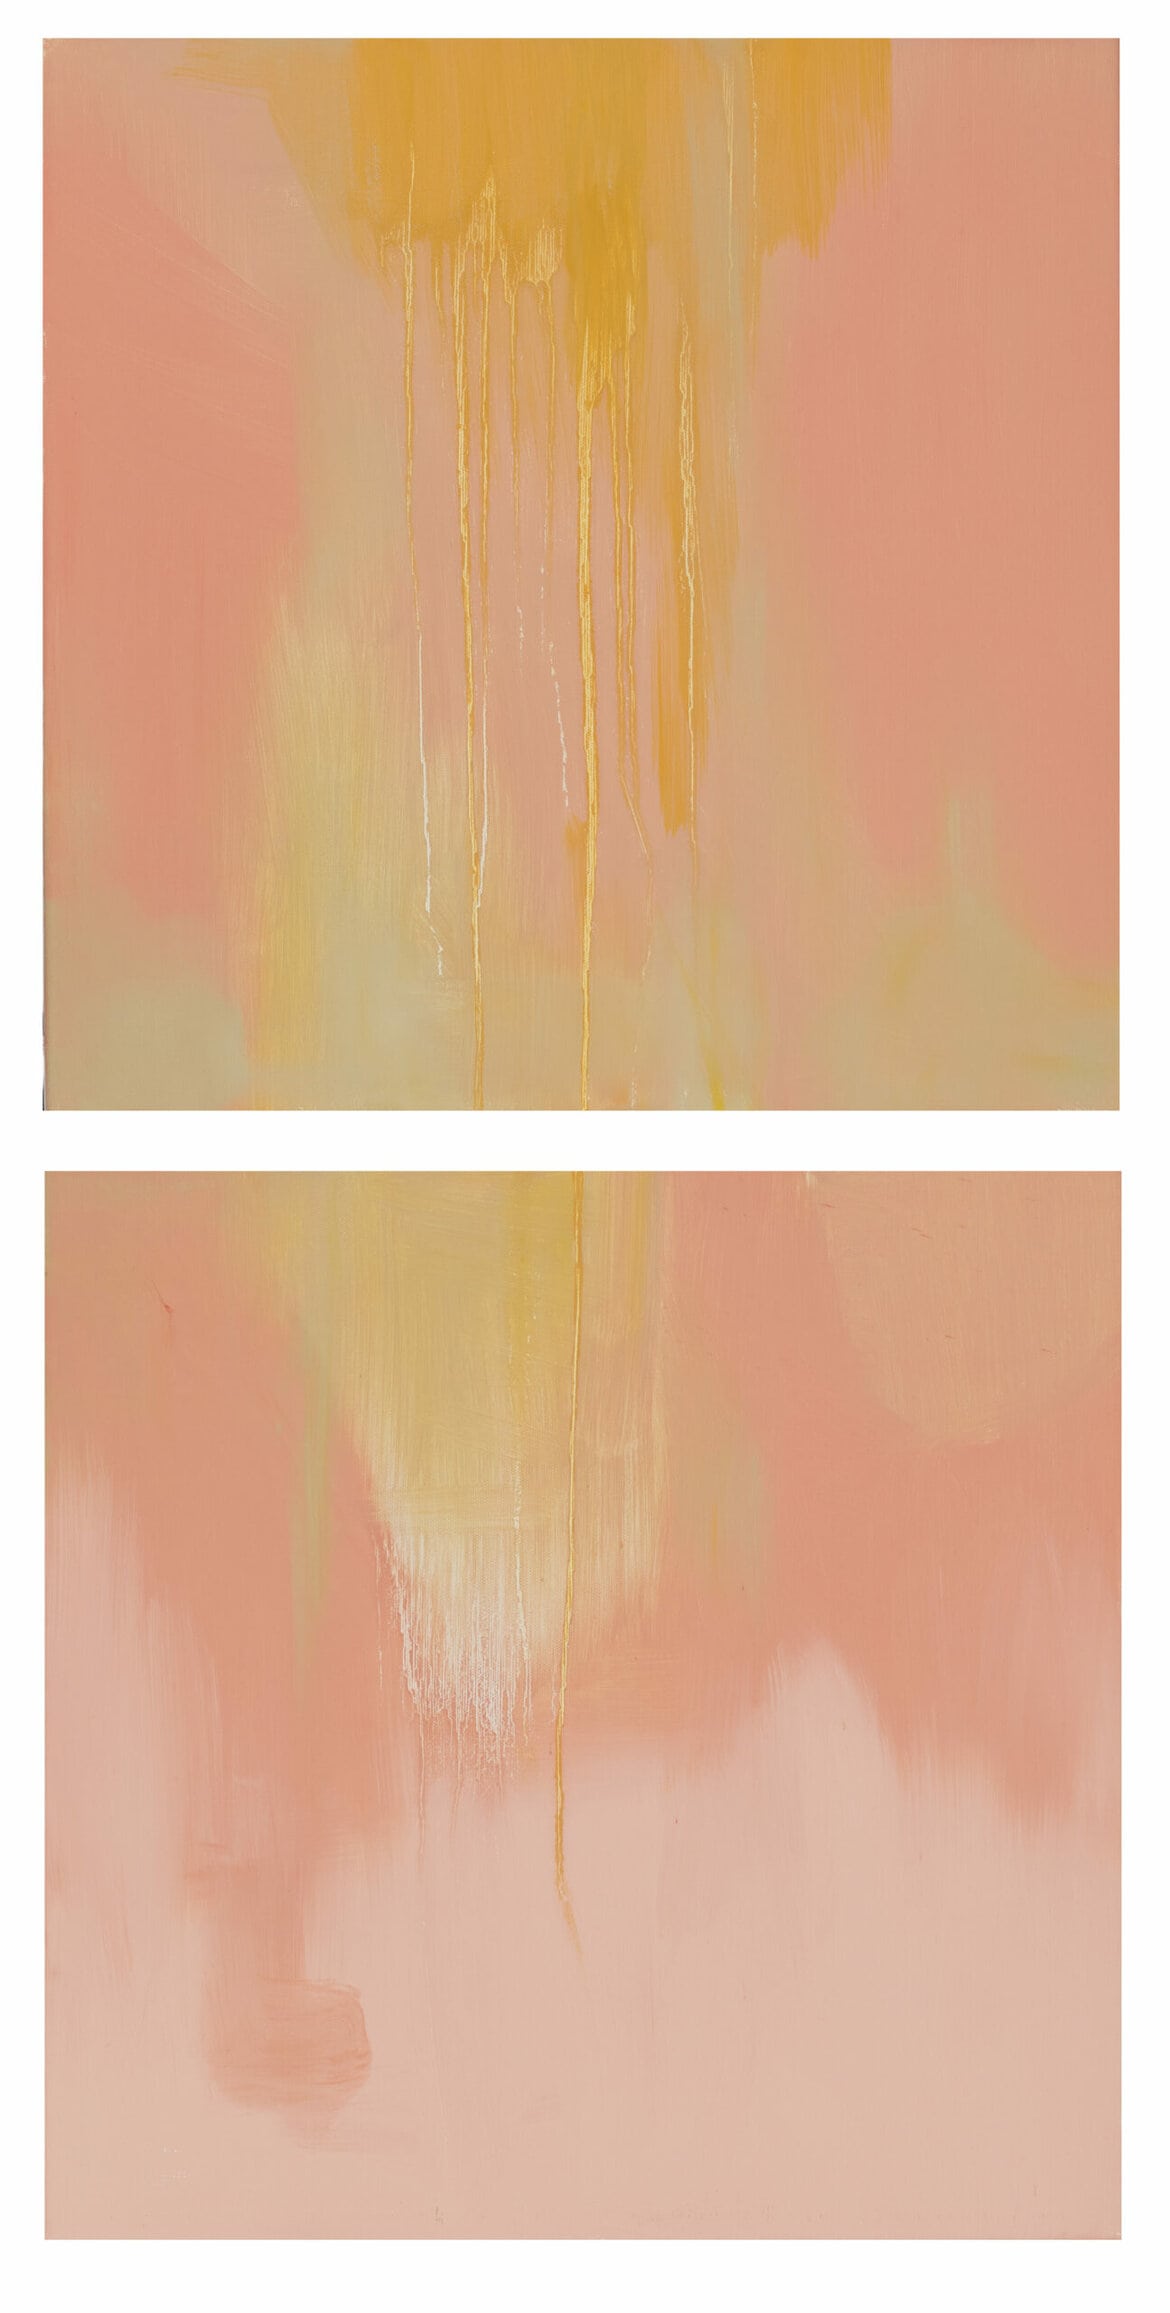 'Diptych 9', 2022, oil and acrylic on Belgian linen, 2 panels, 100 x 50cm